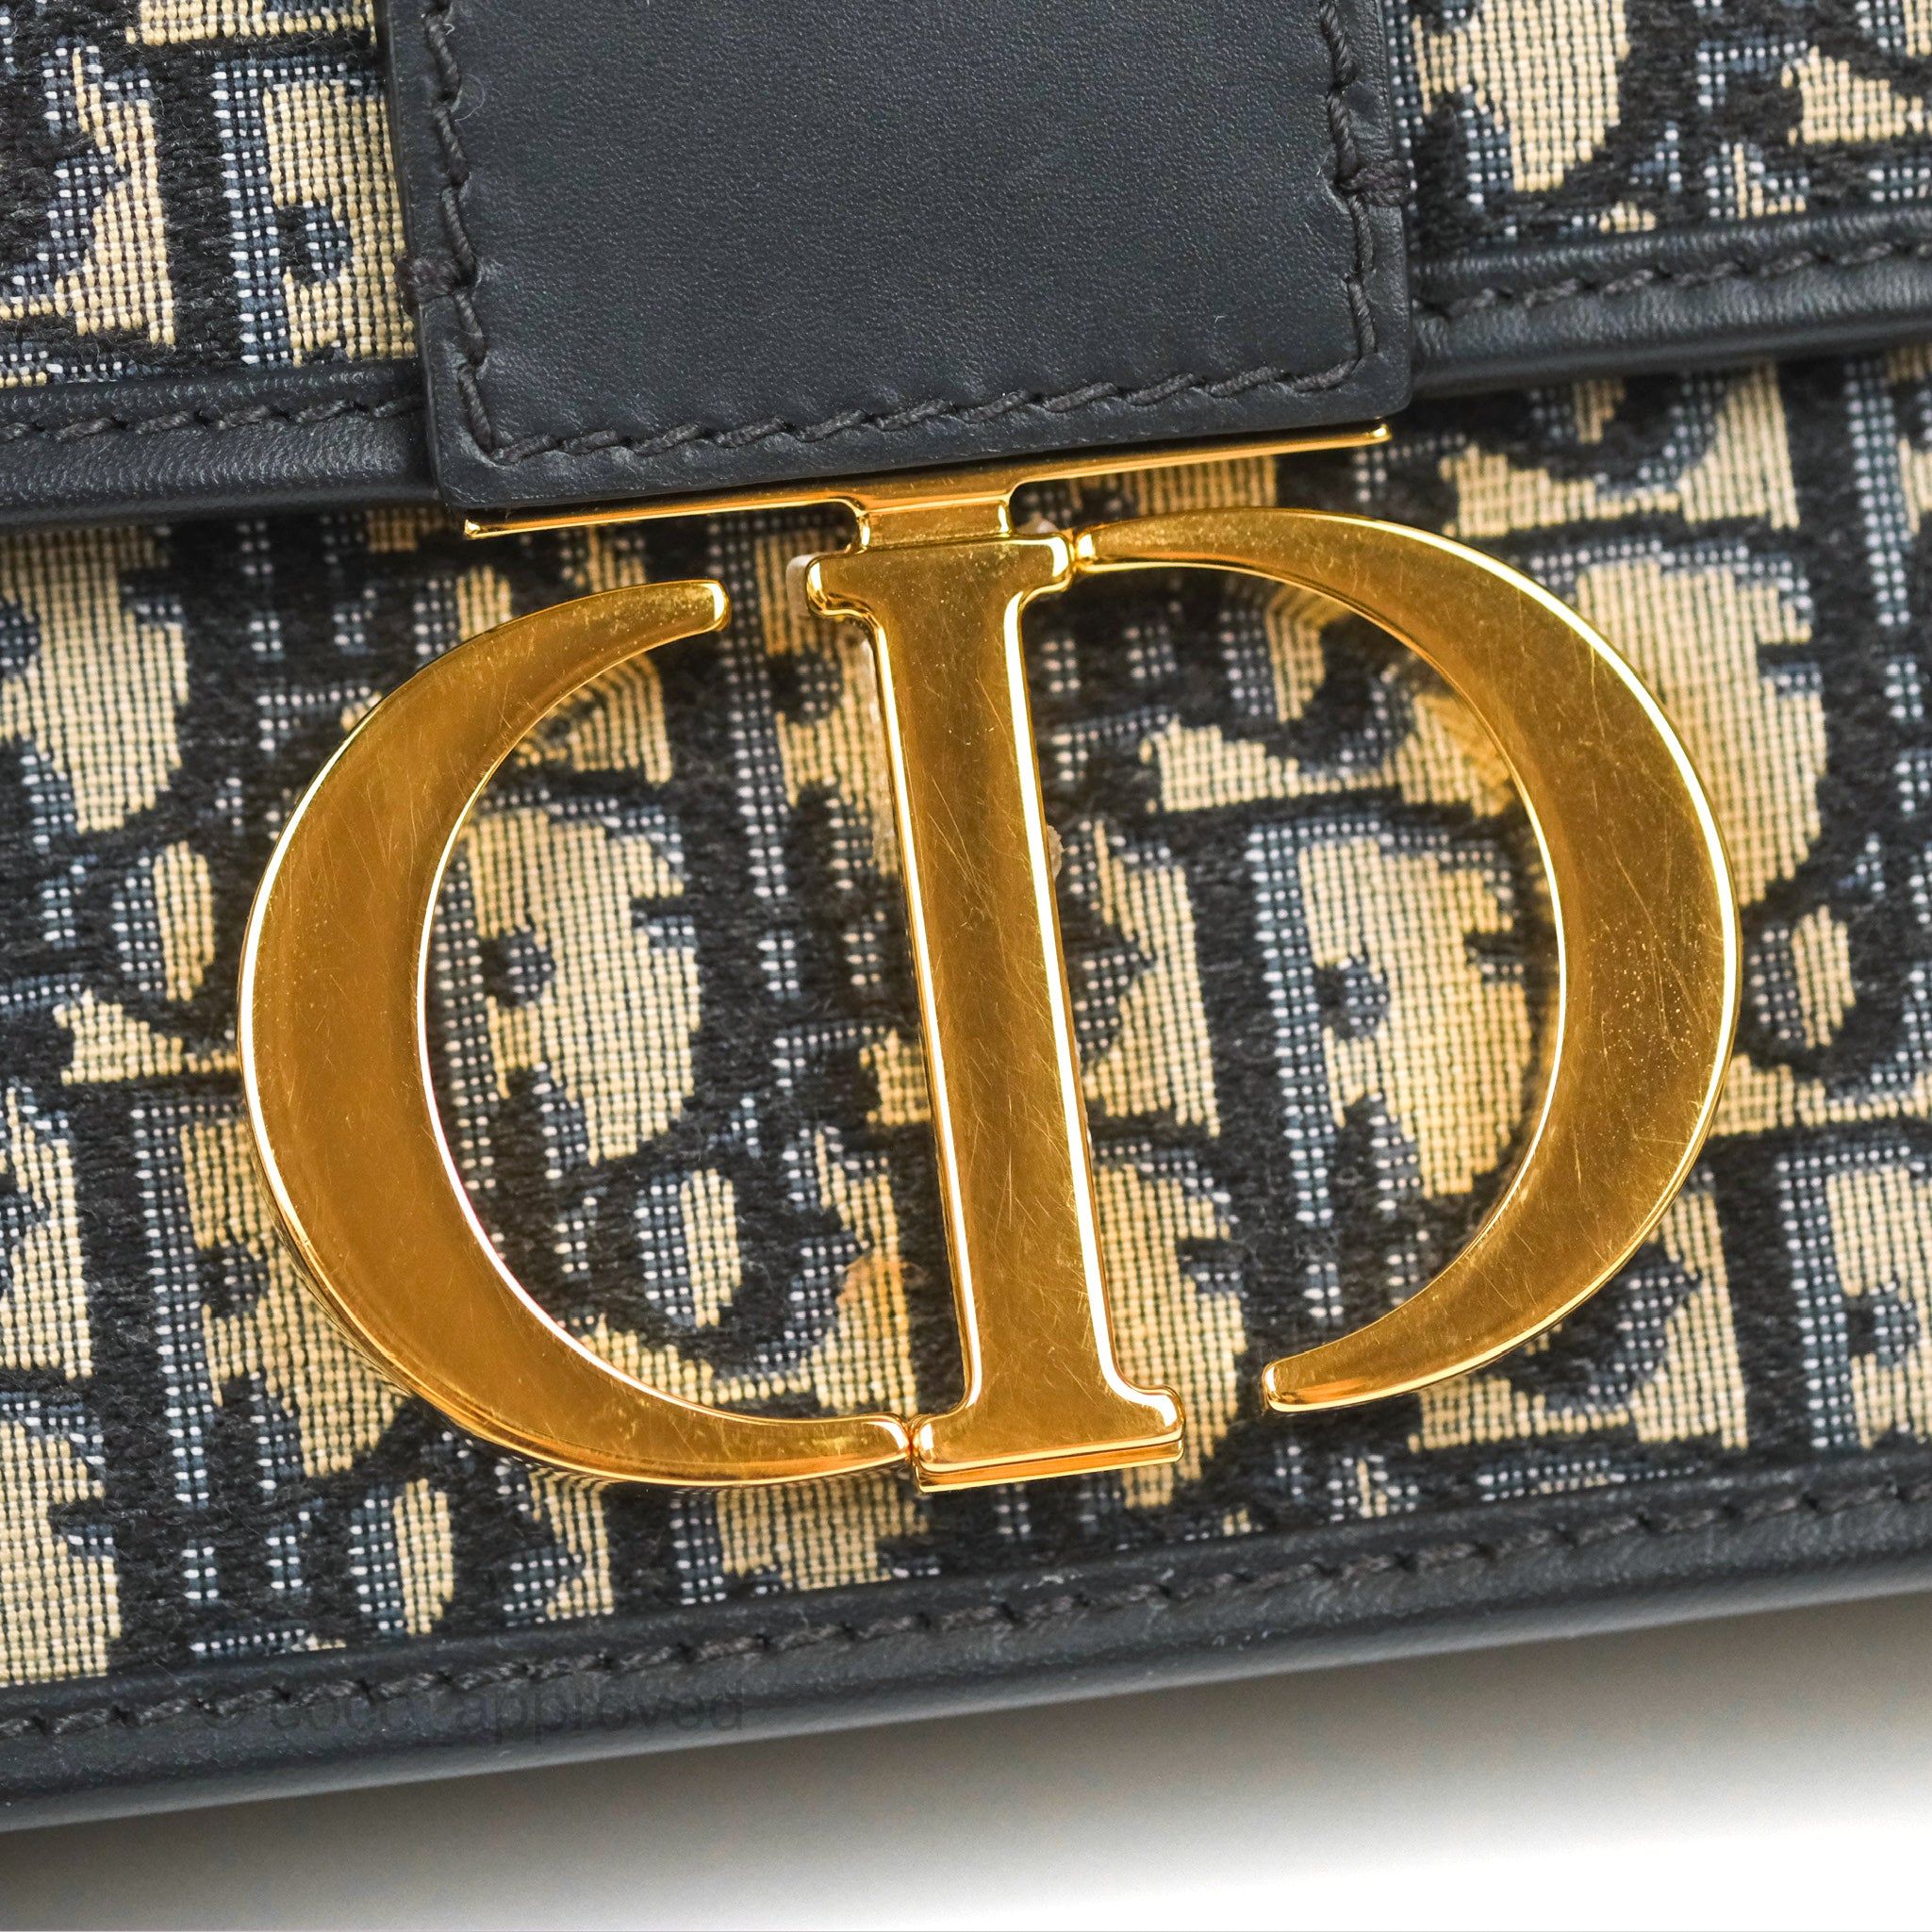 Dior 30 Montaigne East-West Bag With Chain Blue Dior Oblique Jacquard –  Coco Approved Studio